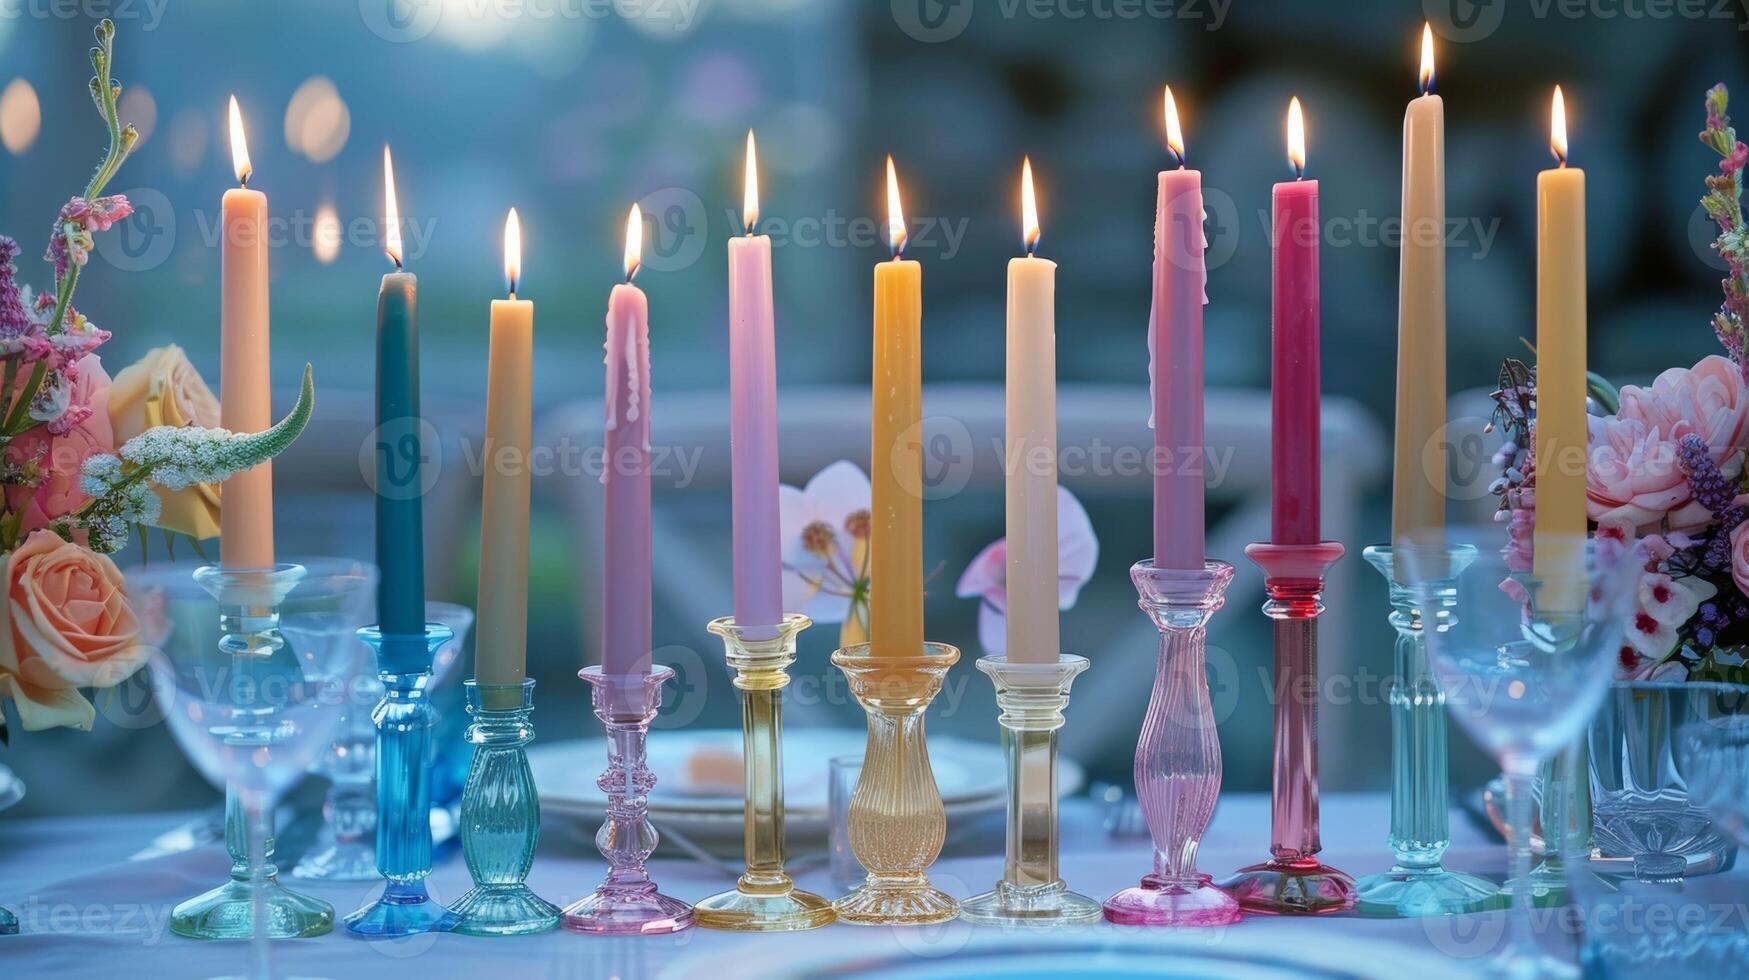 A collection of elegant taper candles in various jewel tones casting a romantic aura over a dinner table photo